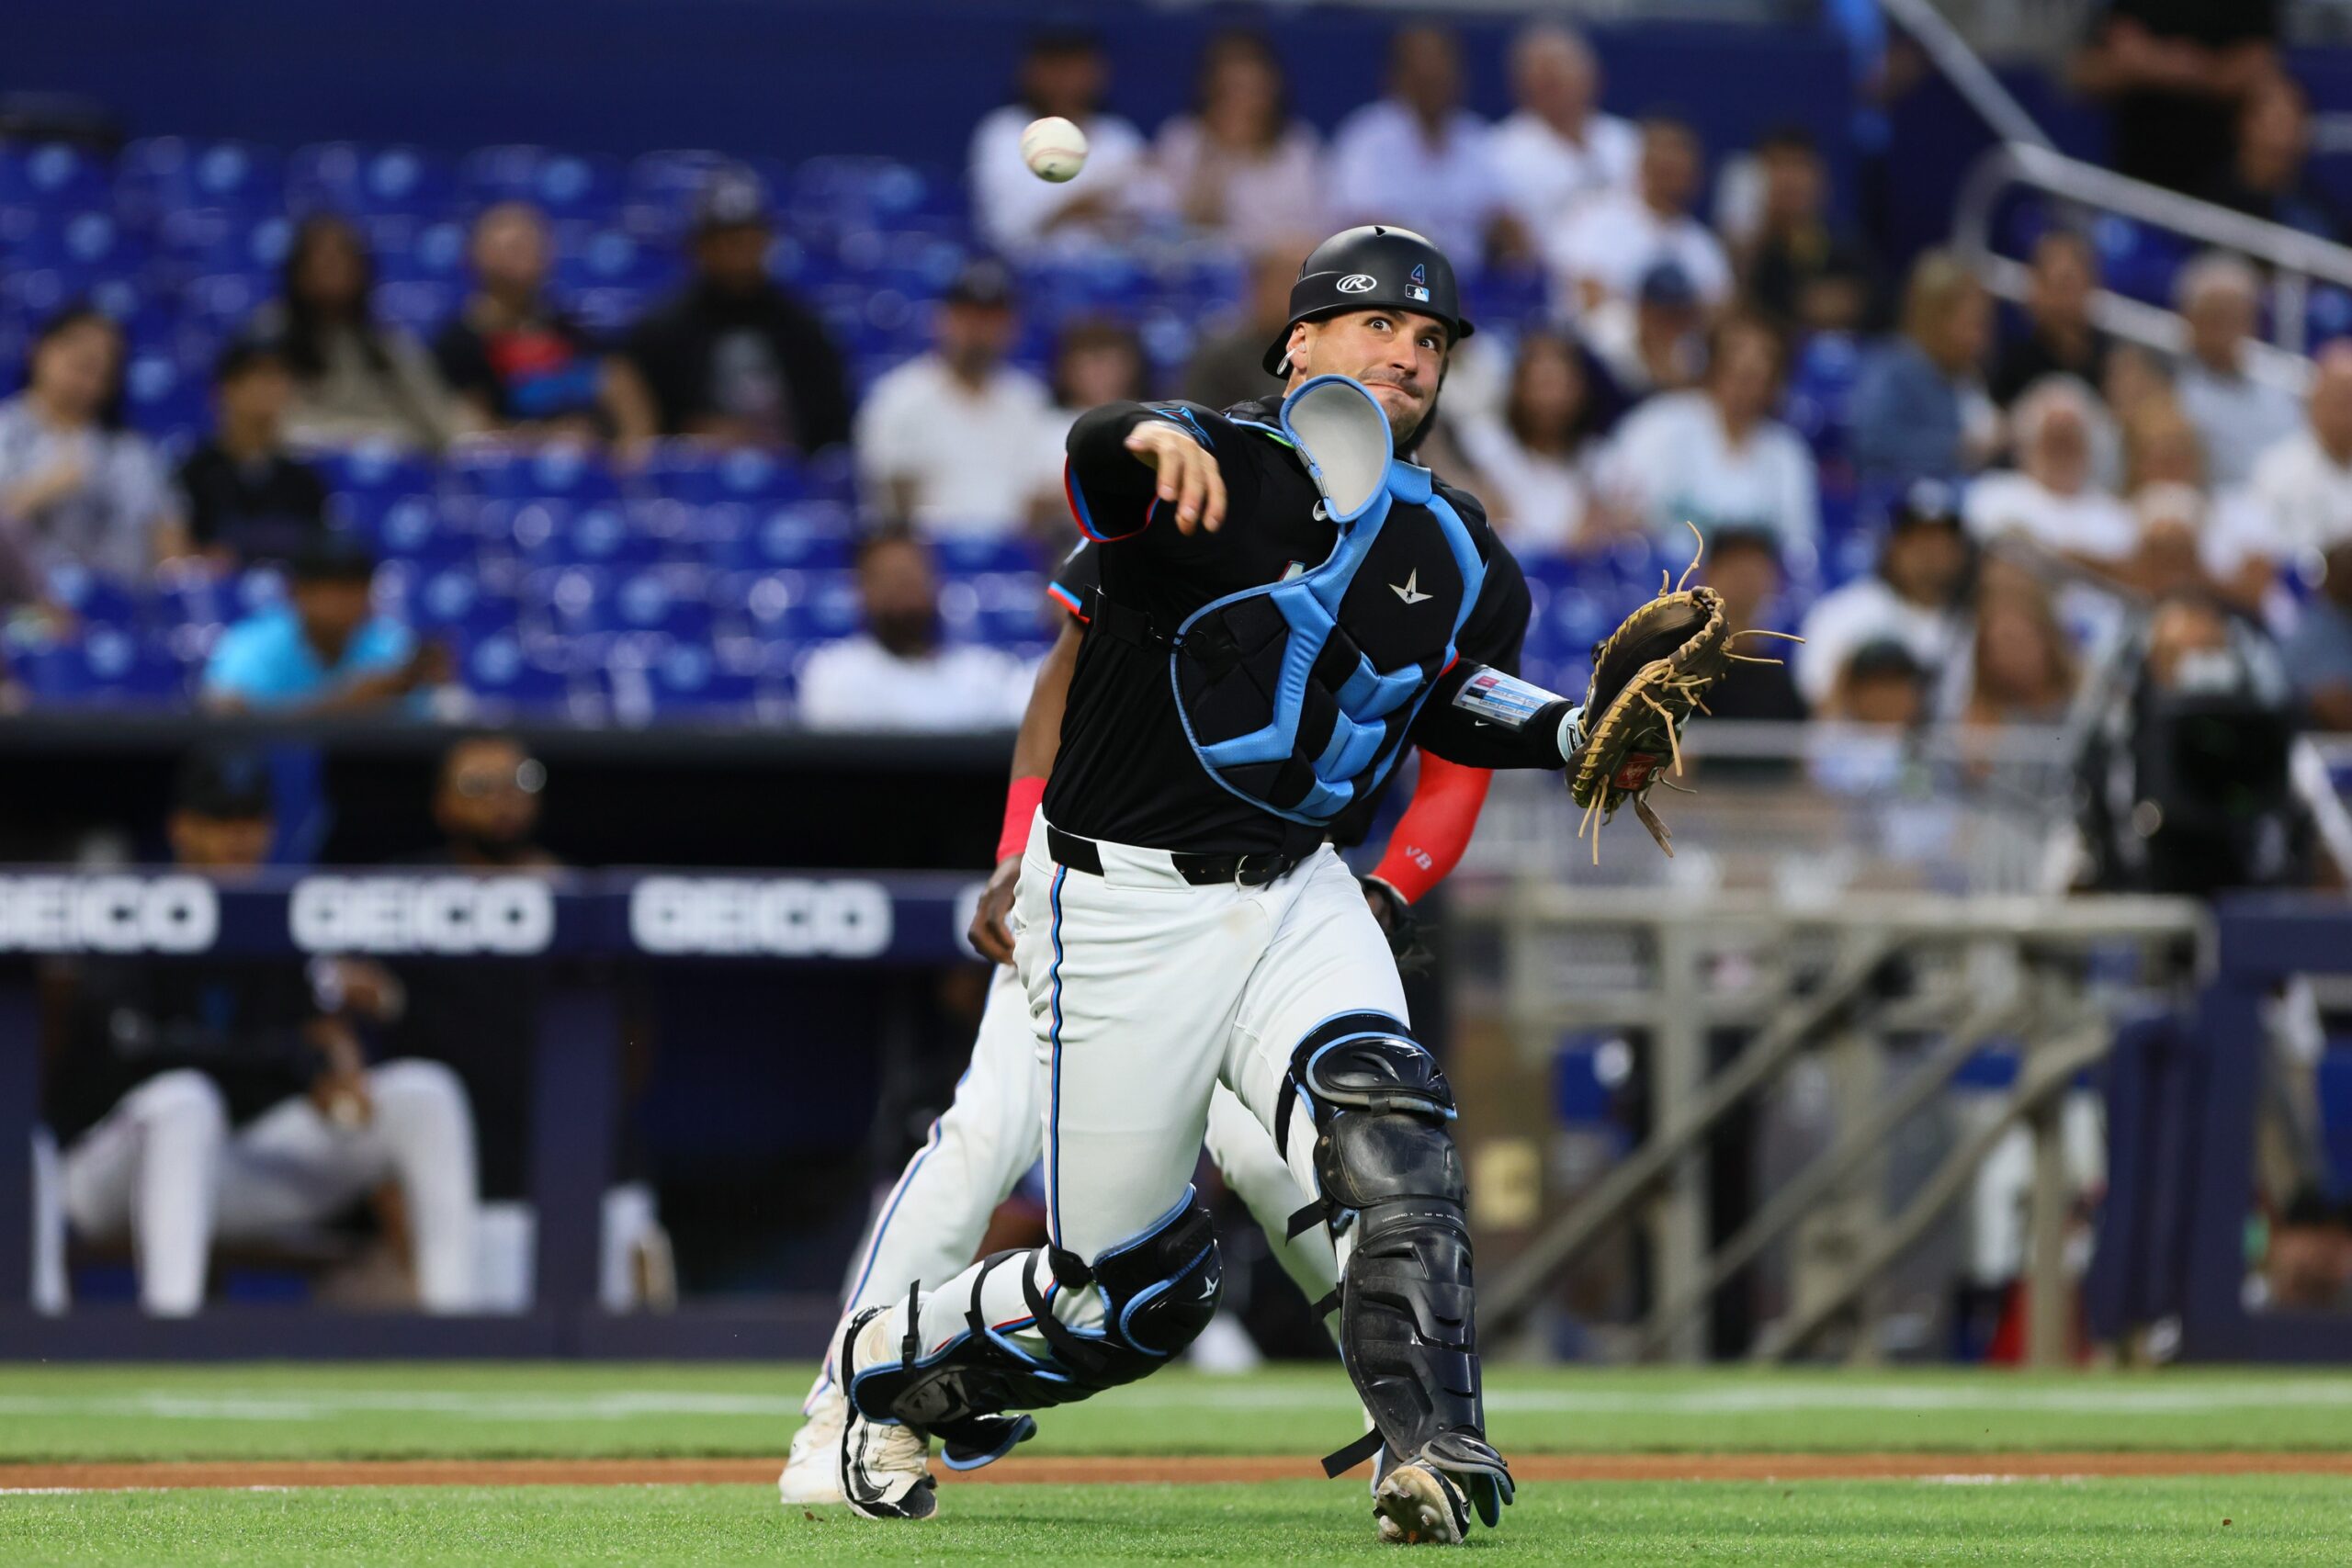 Possible Trade Options To Upgrade Struggling Marlins Catching Position